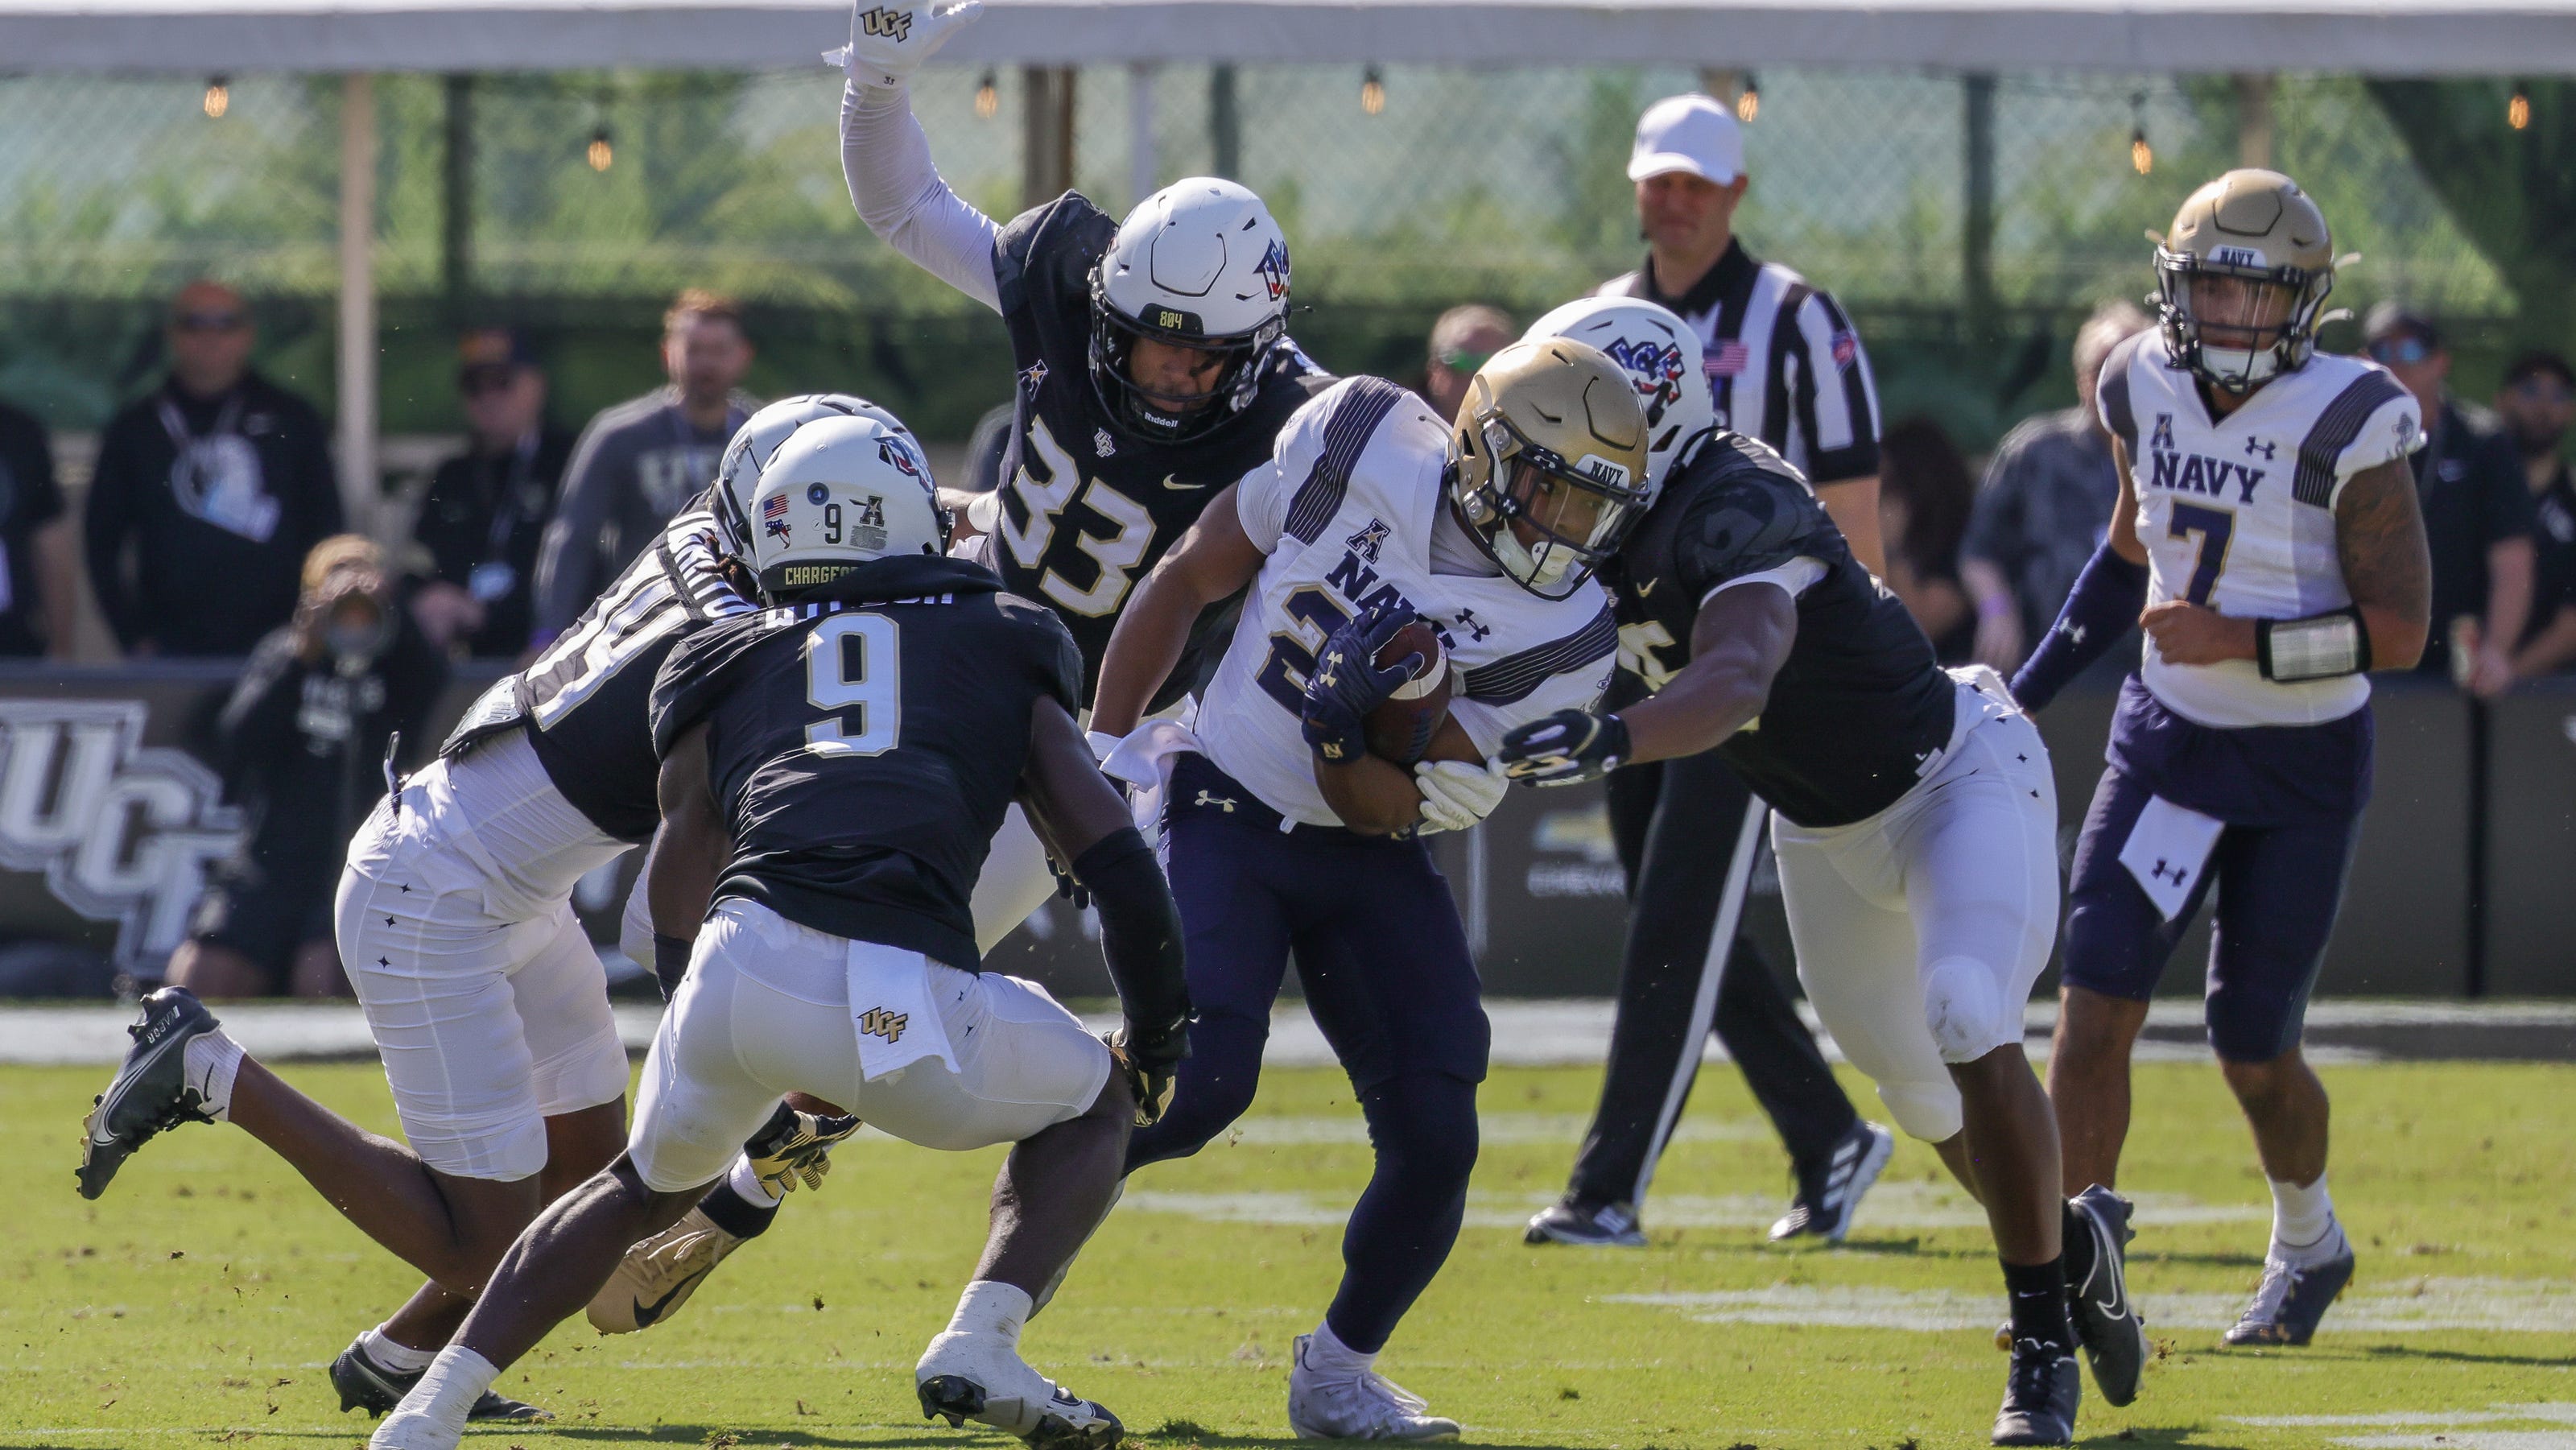 Game recap: UCF's hopes for AAC championship game take massive hit in 17-14 loss to Navy